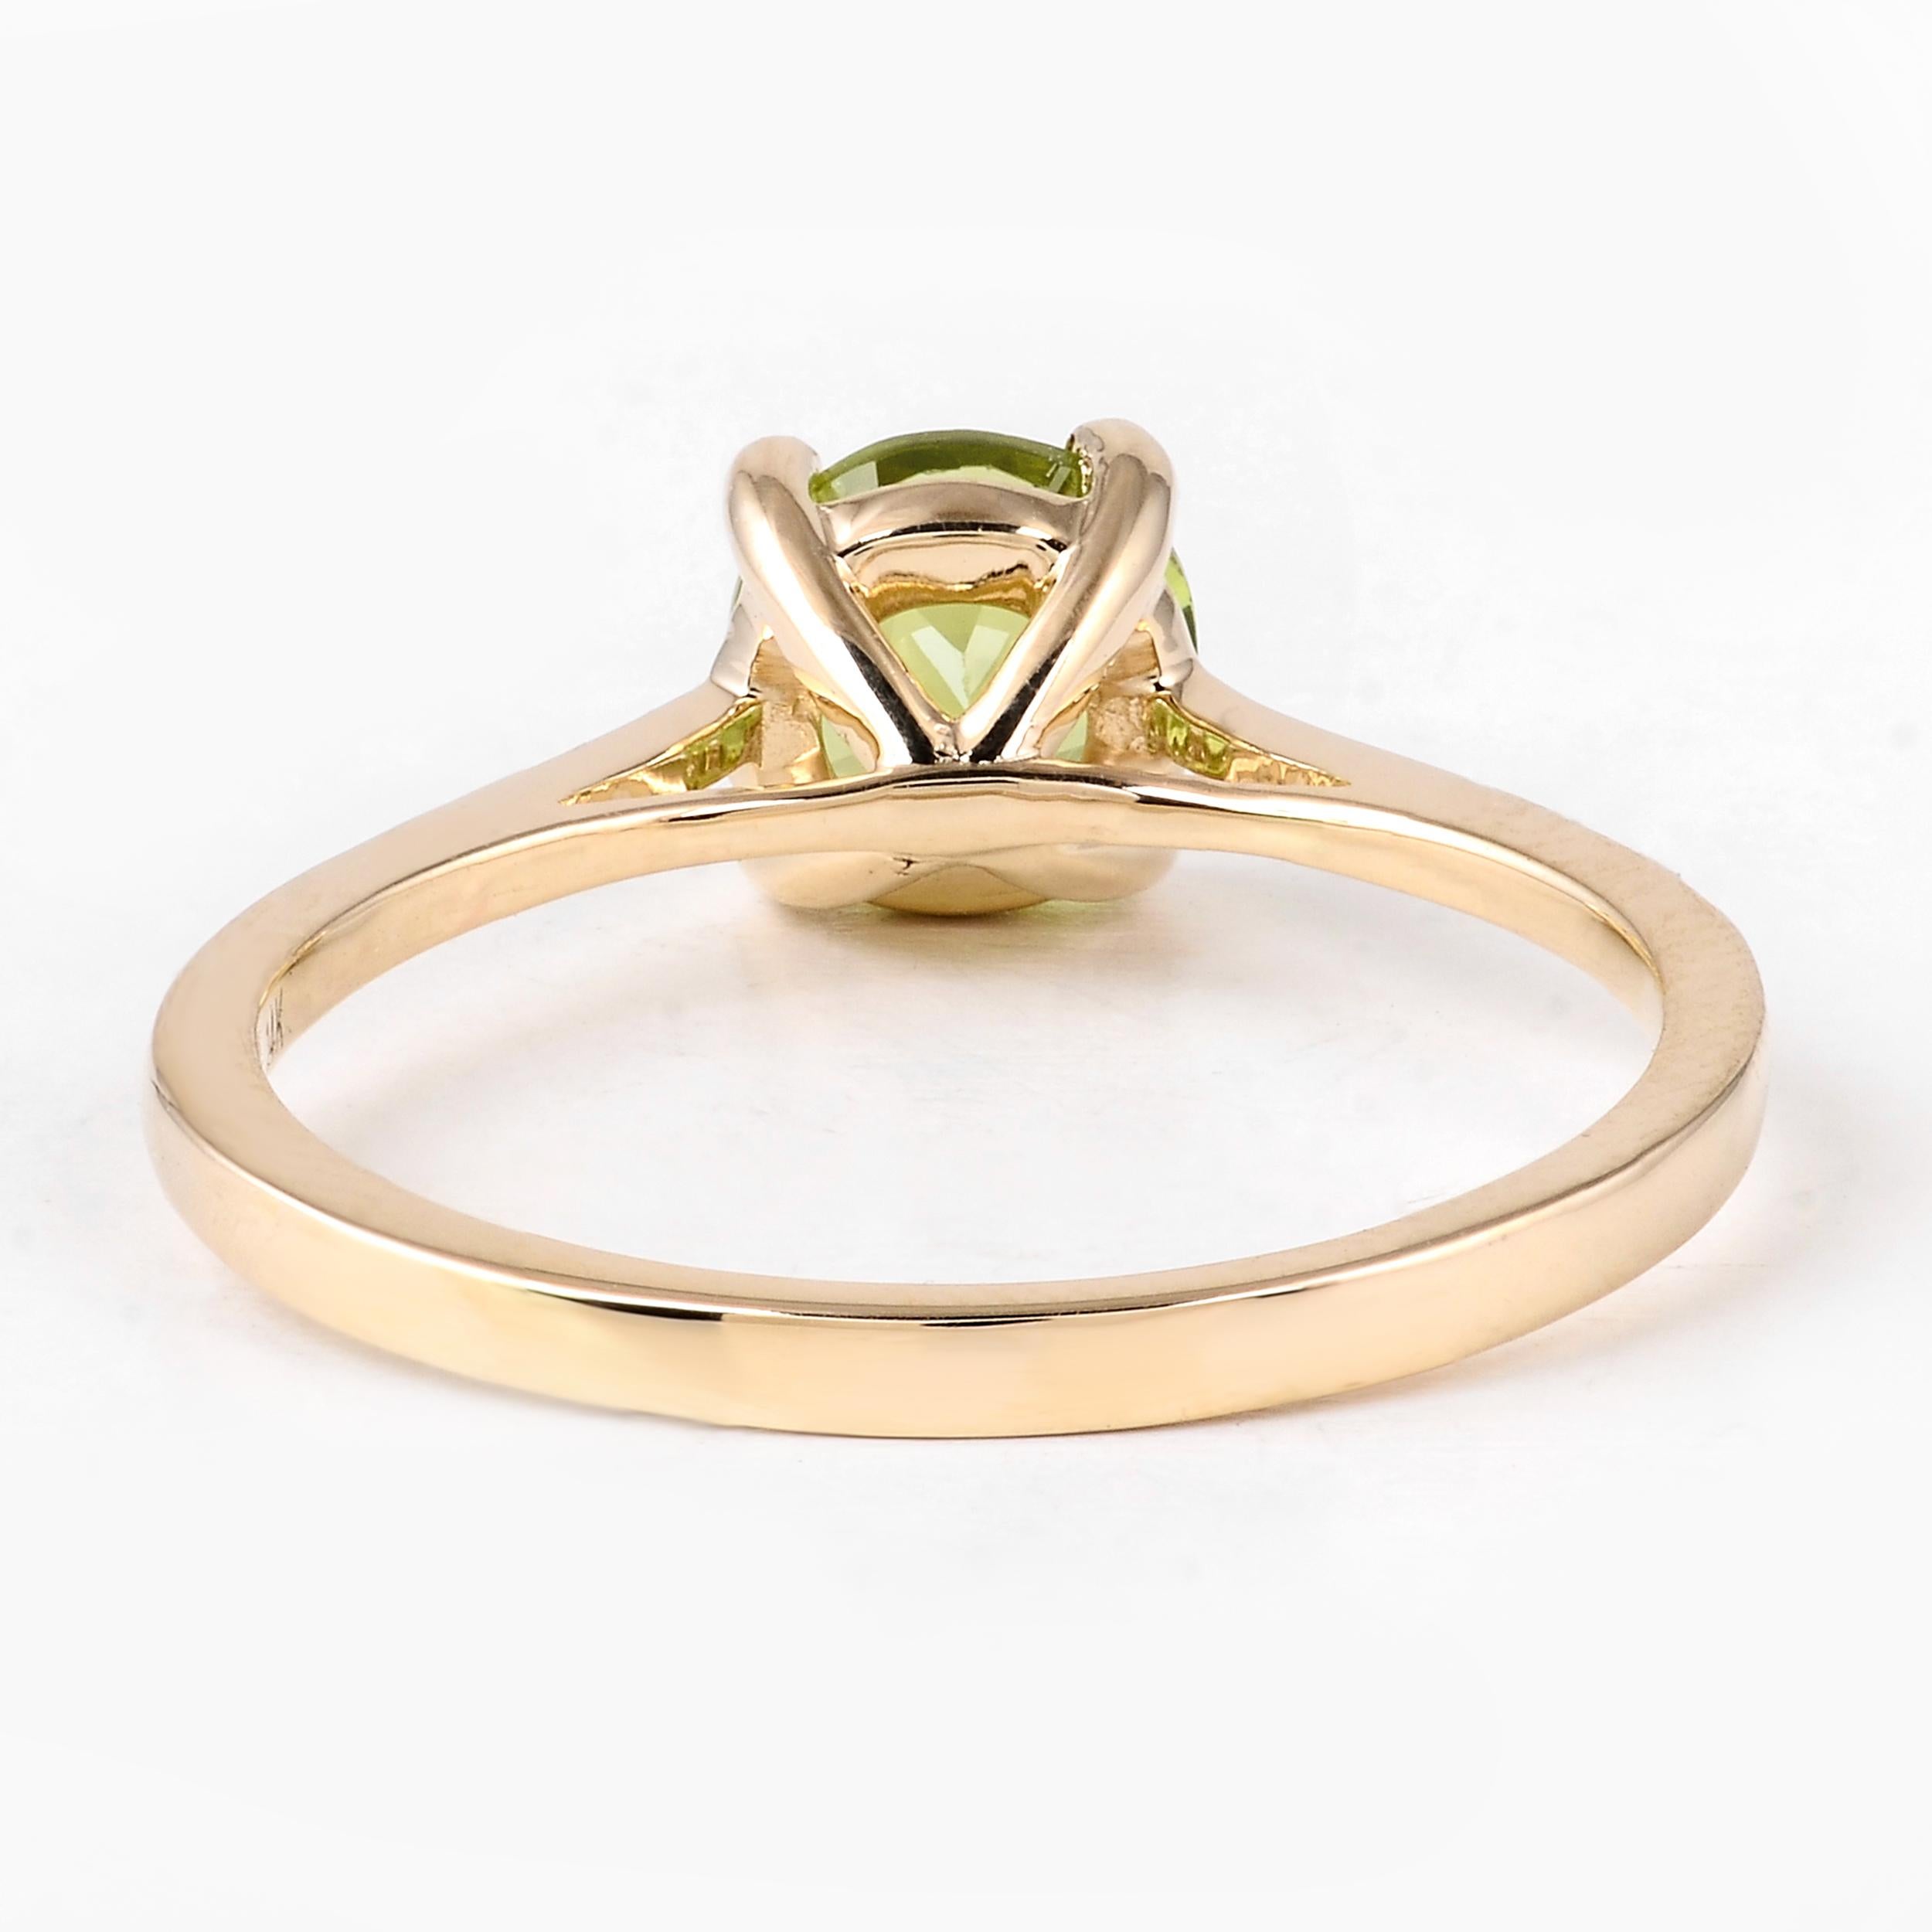 Elegant 14K Peridot Cocktail Ring, Size 7 - Stunning Statement Jewelry Piece For Sale 2